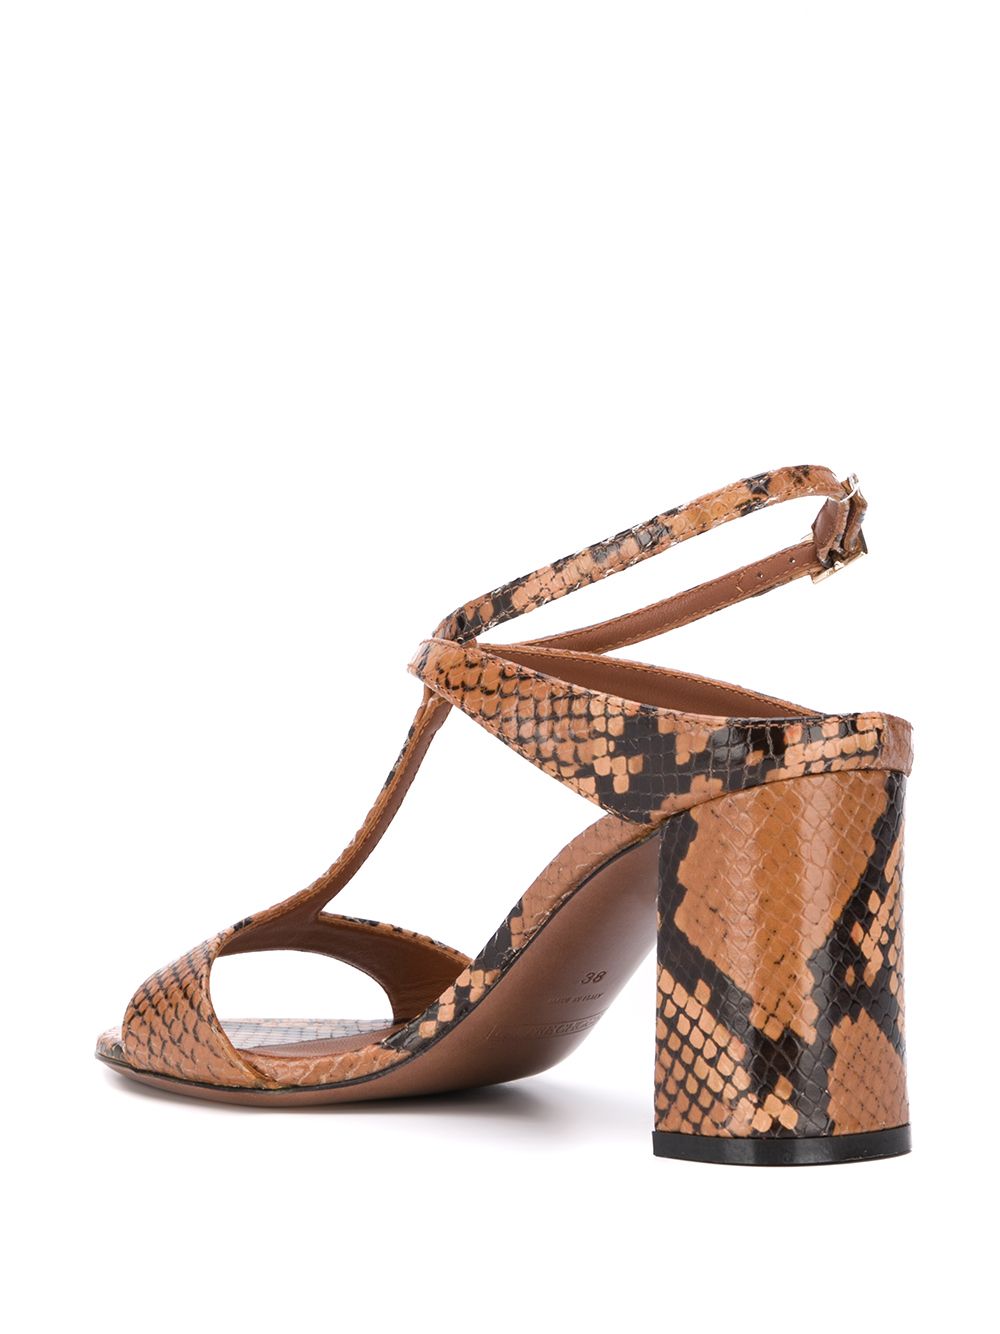 Open Toe Sandals In Cigar Python Print Leather LDL054.95CP29112106 - 6